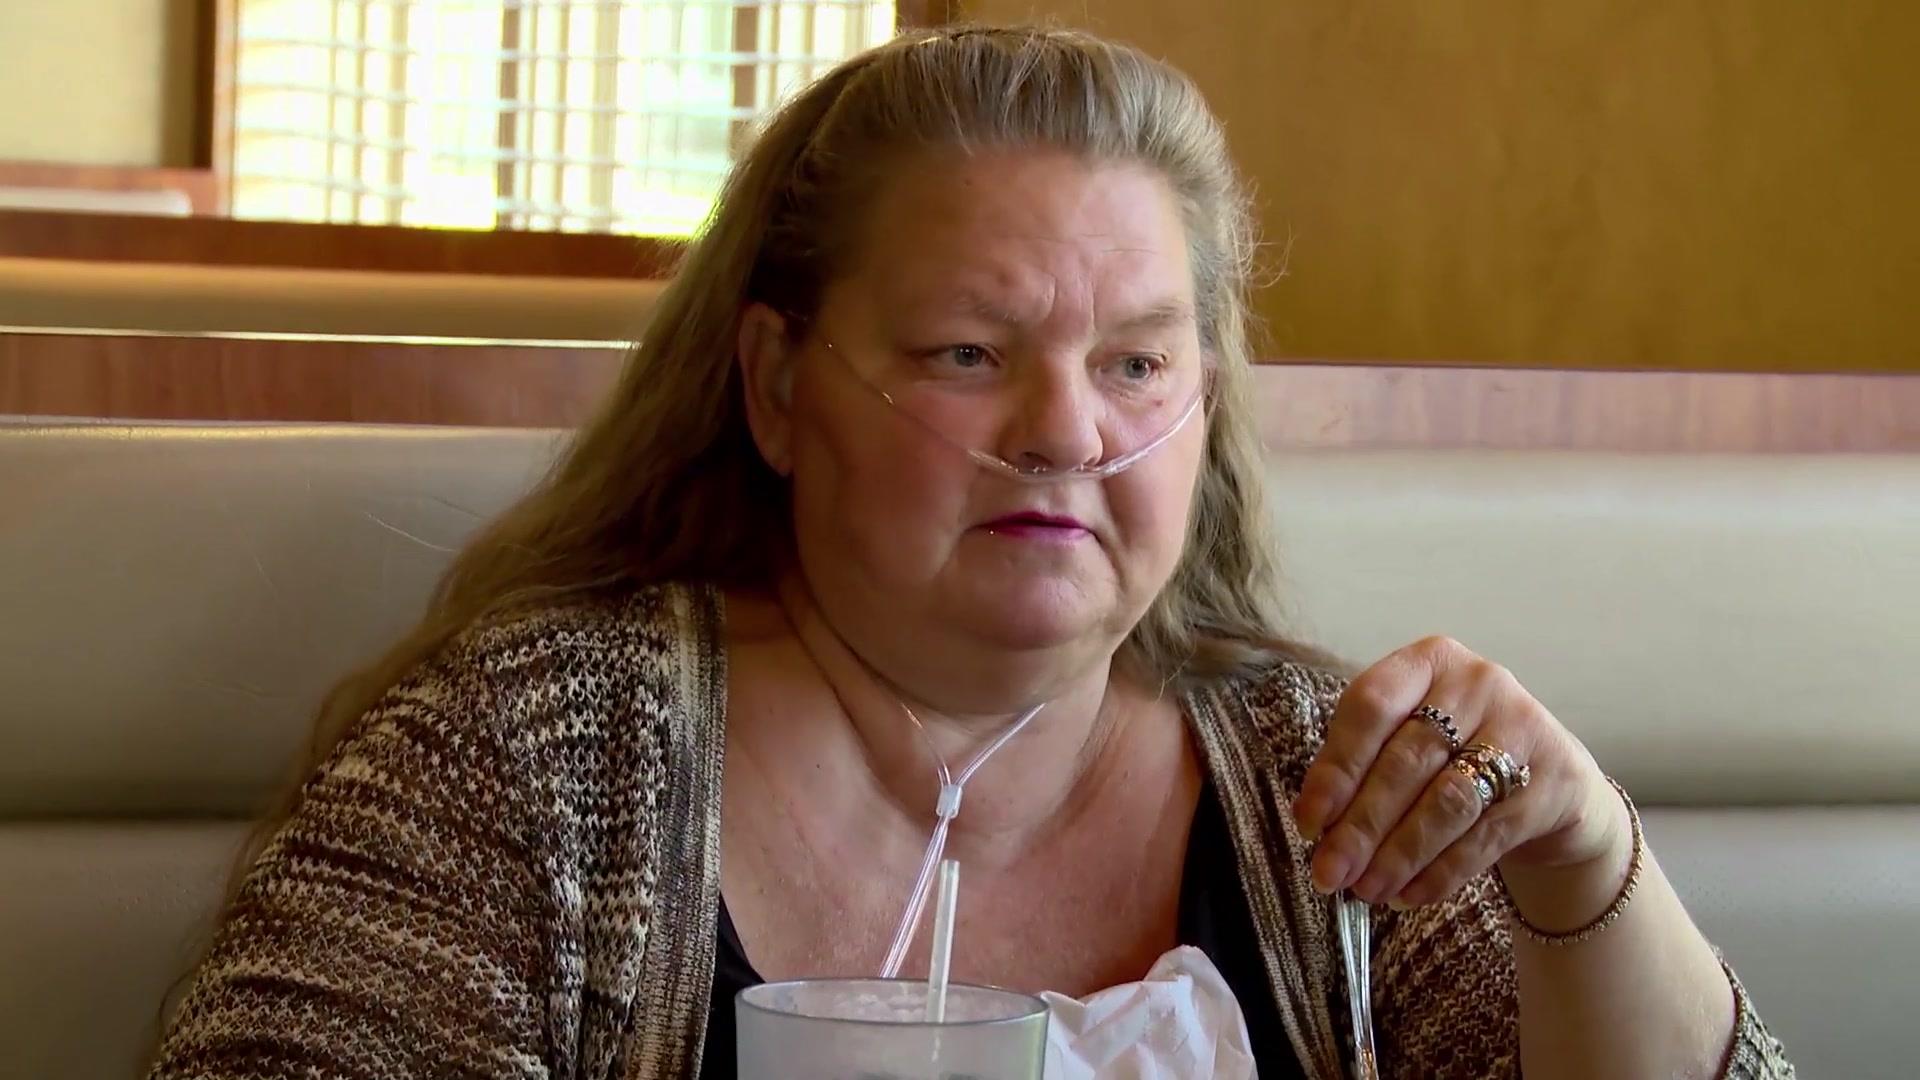 Watch Kristianna's Mom Has Reservations About John | Love After Lockup Video Extras